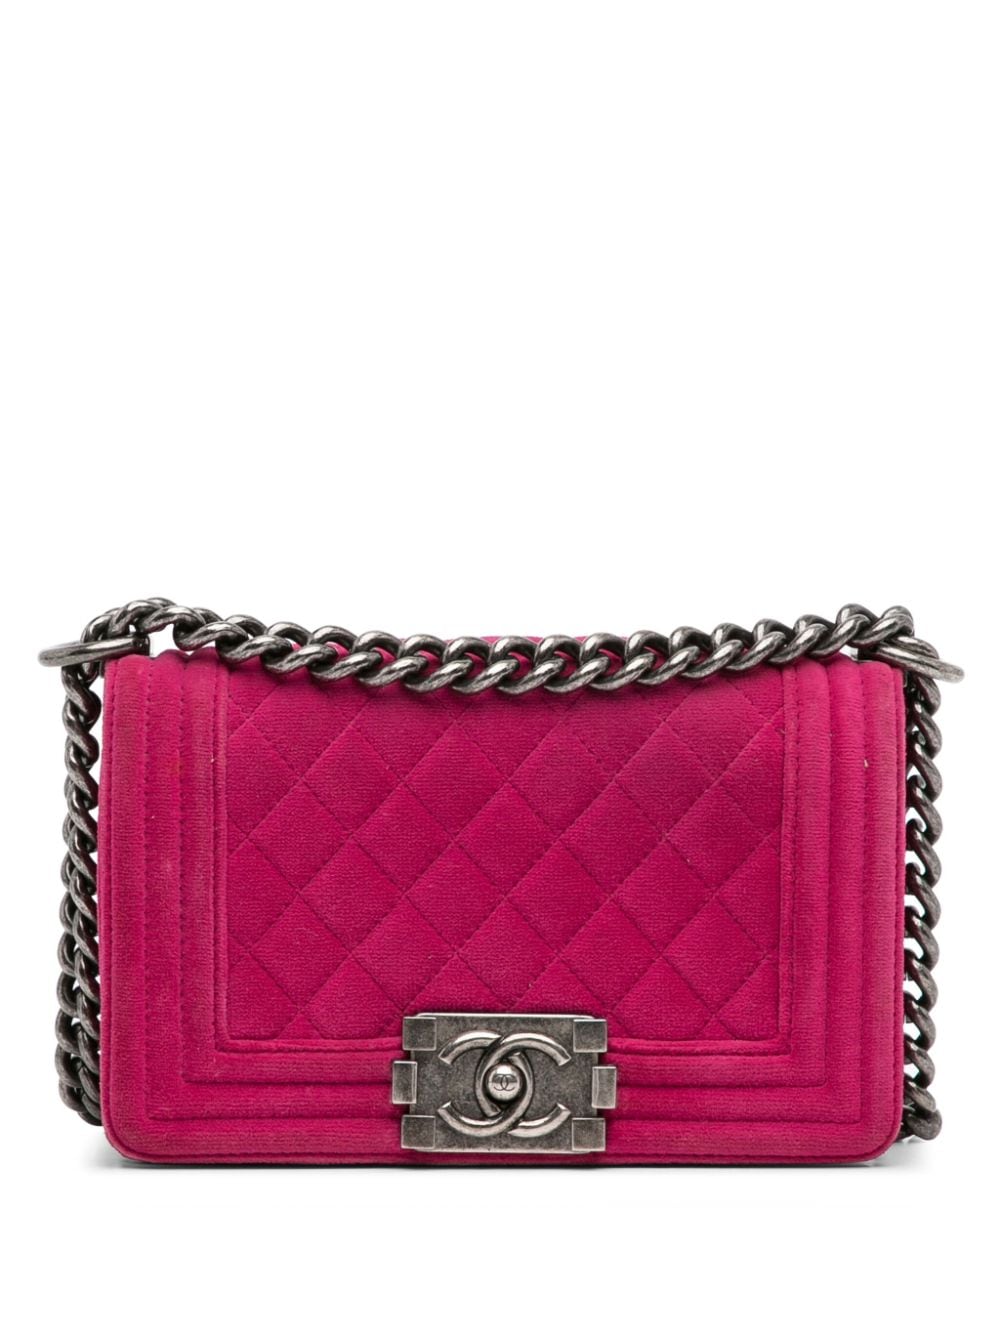 Pre-owned Chanel 2013-2014 Small Boy Velvet Flap Crossbody Bag In Pink